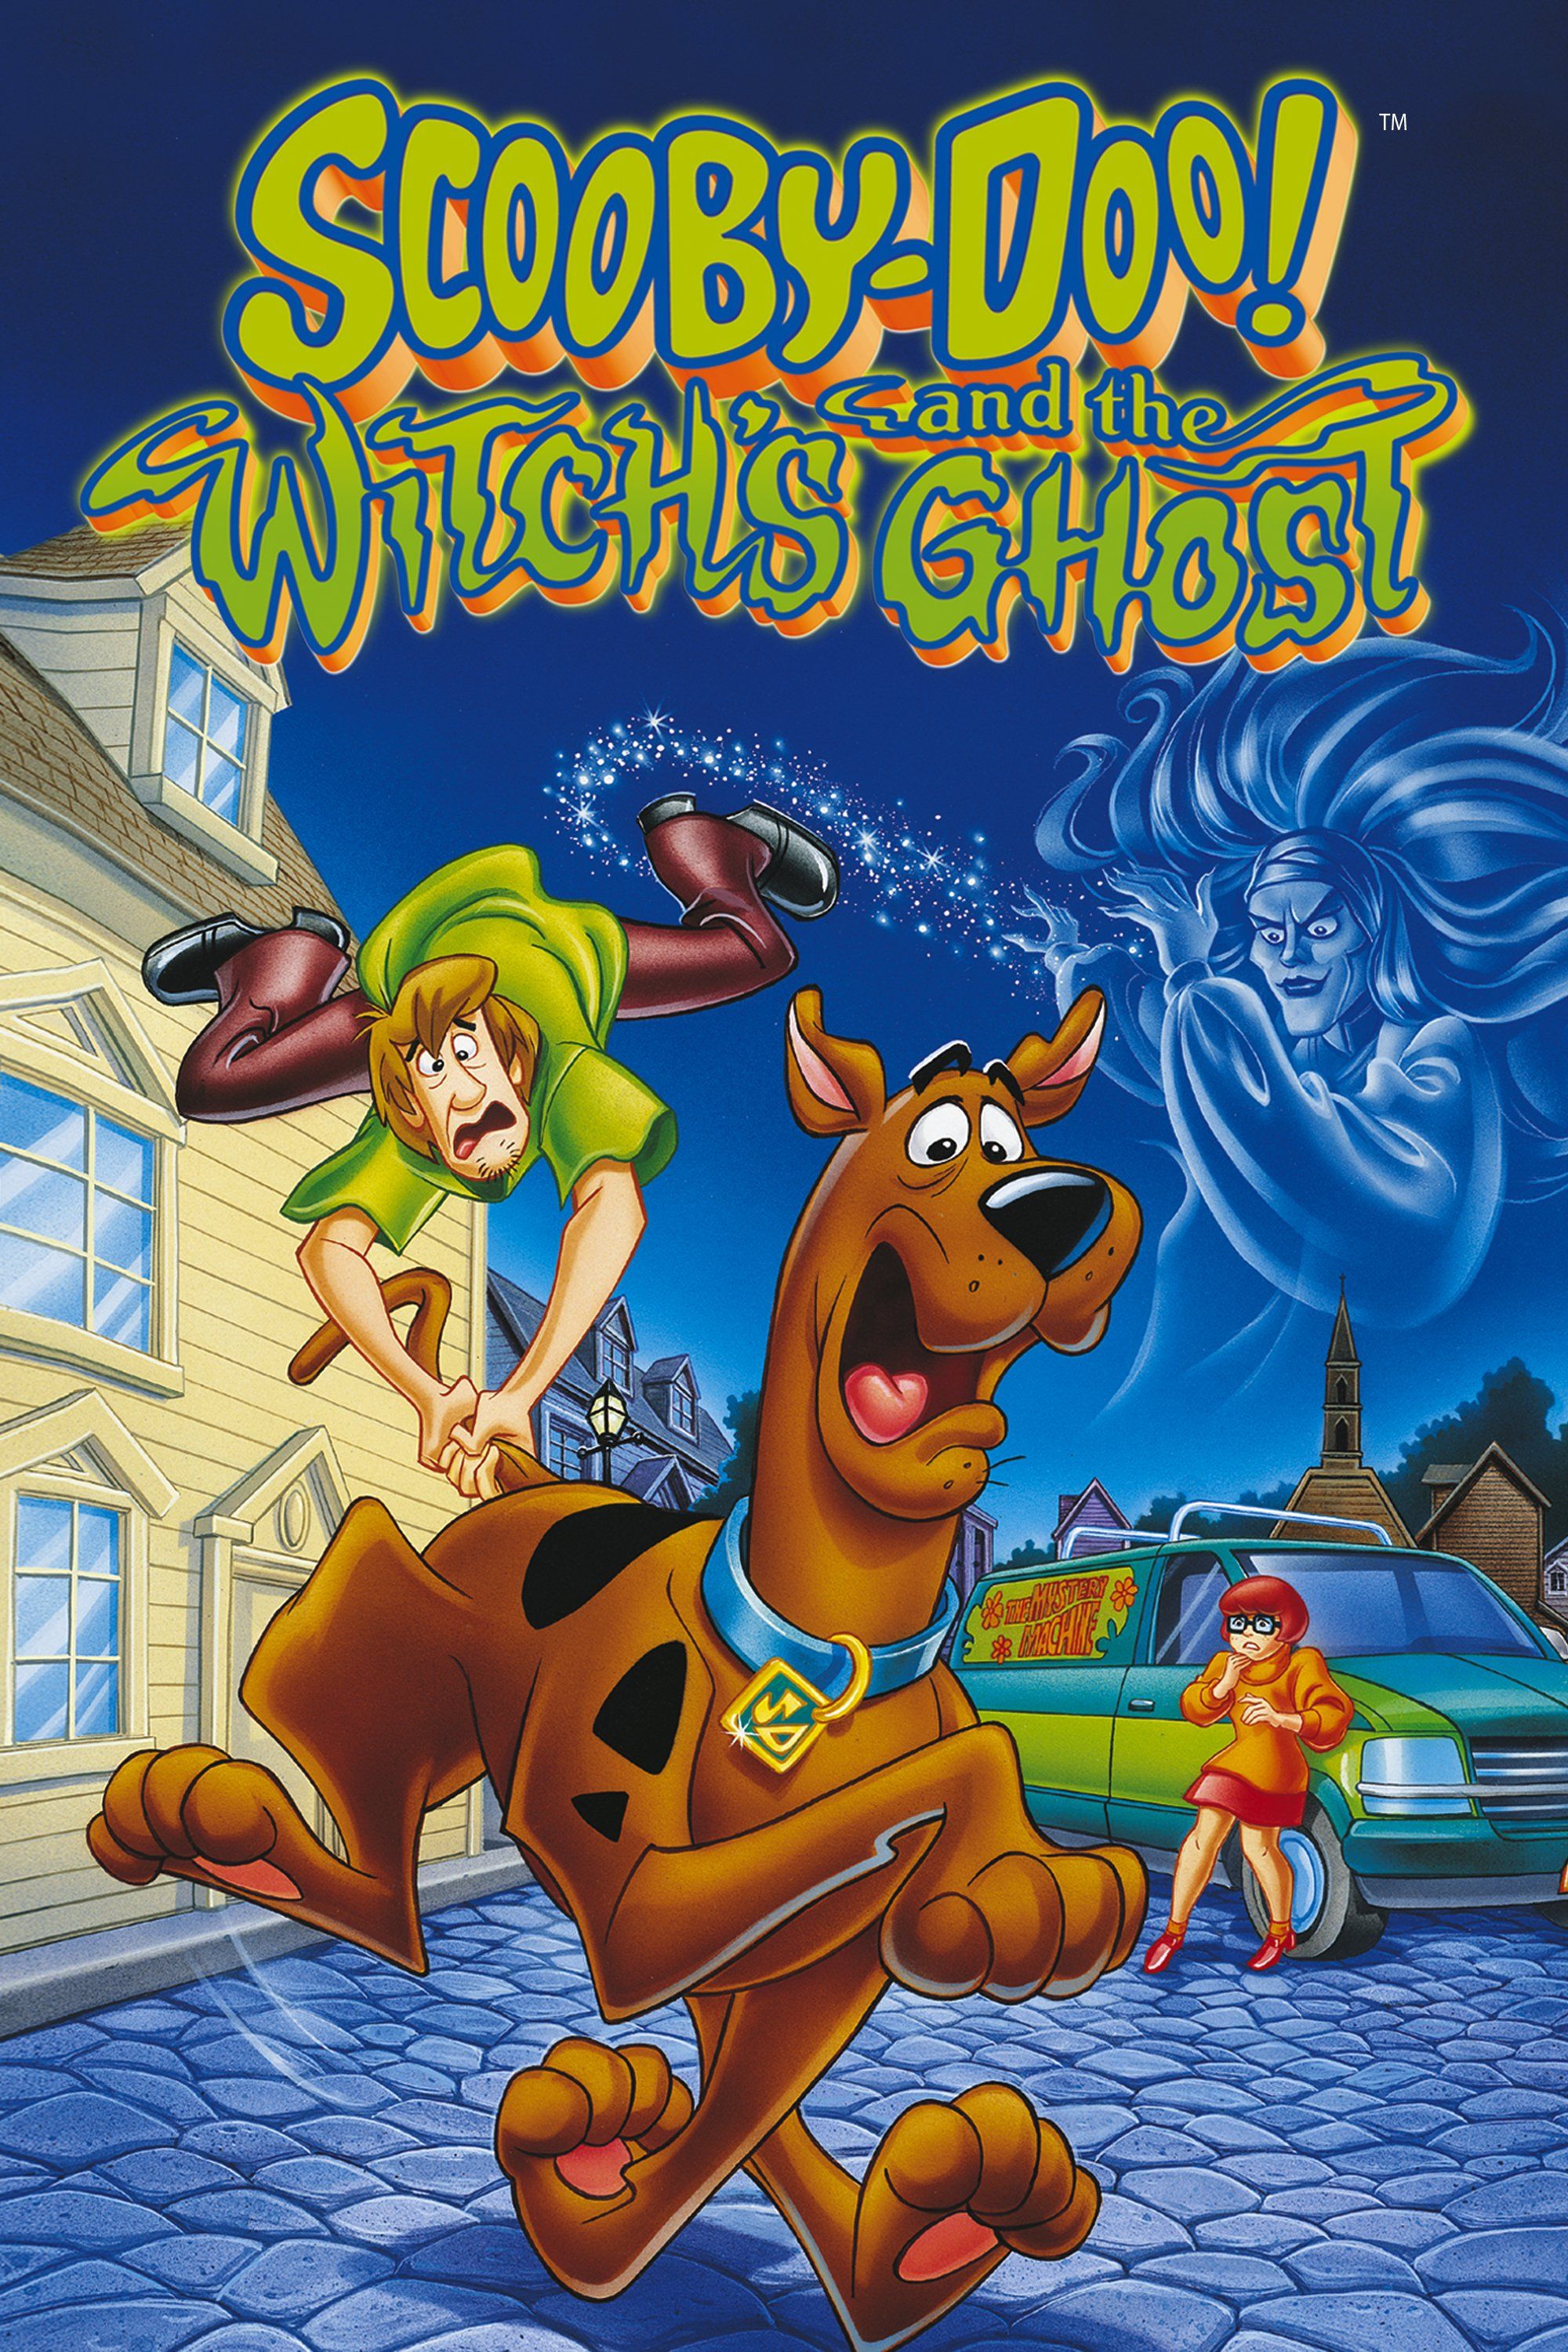 Scooby doo and the witch's ghost full movie